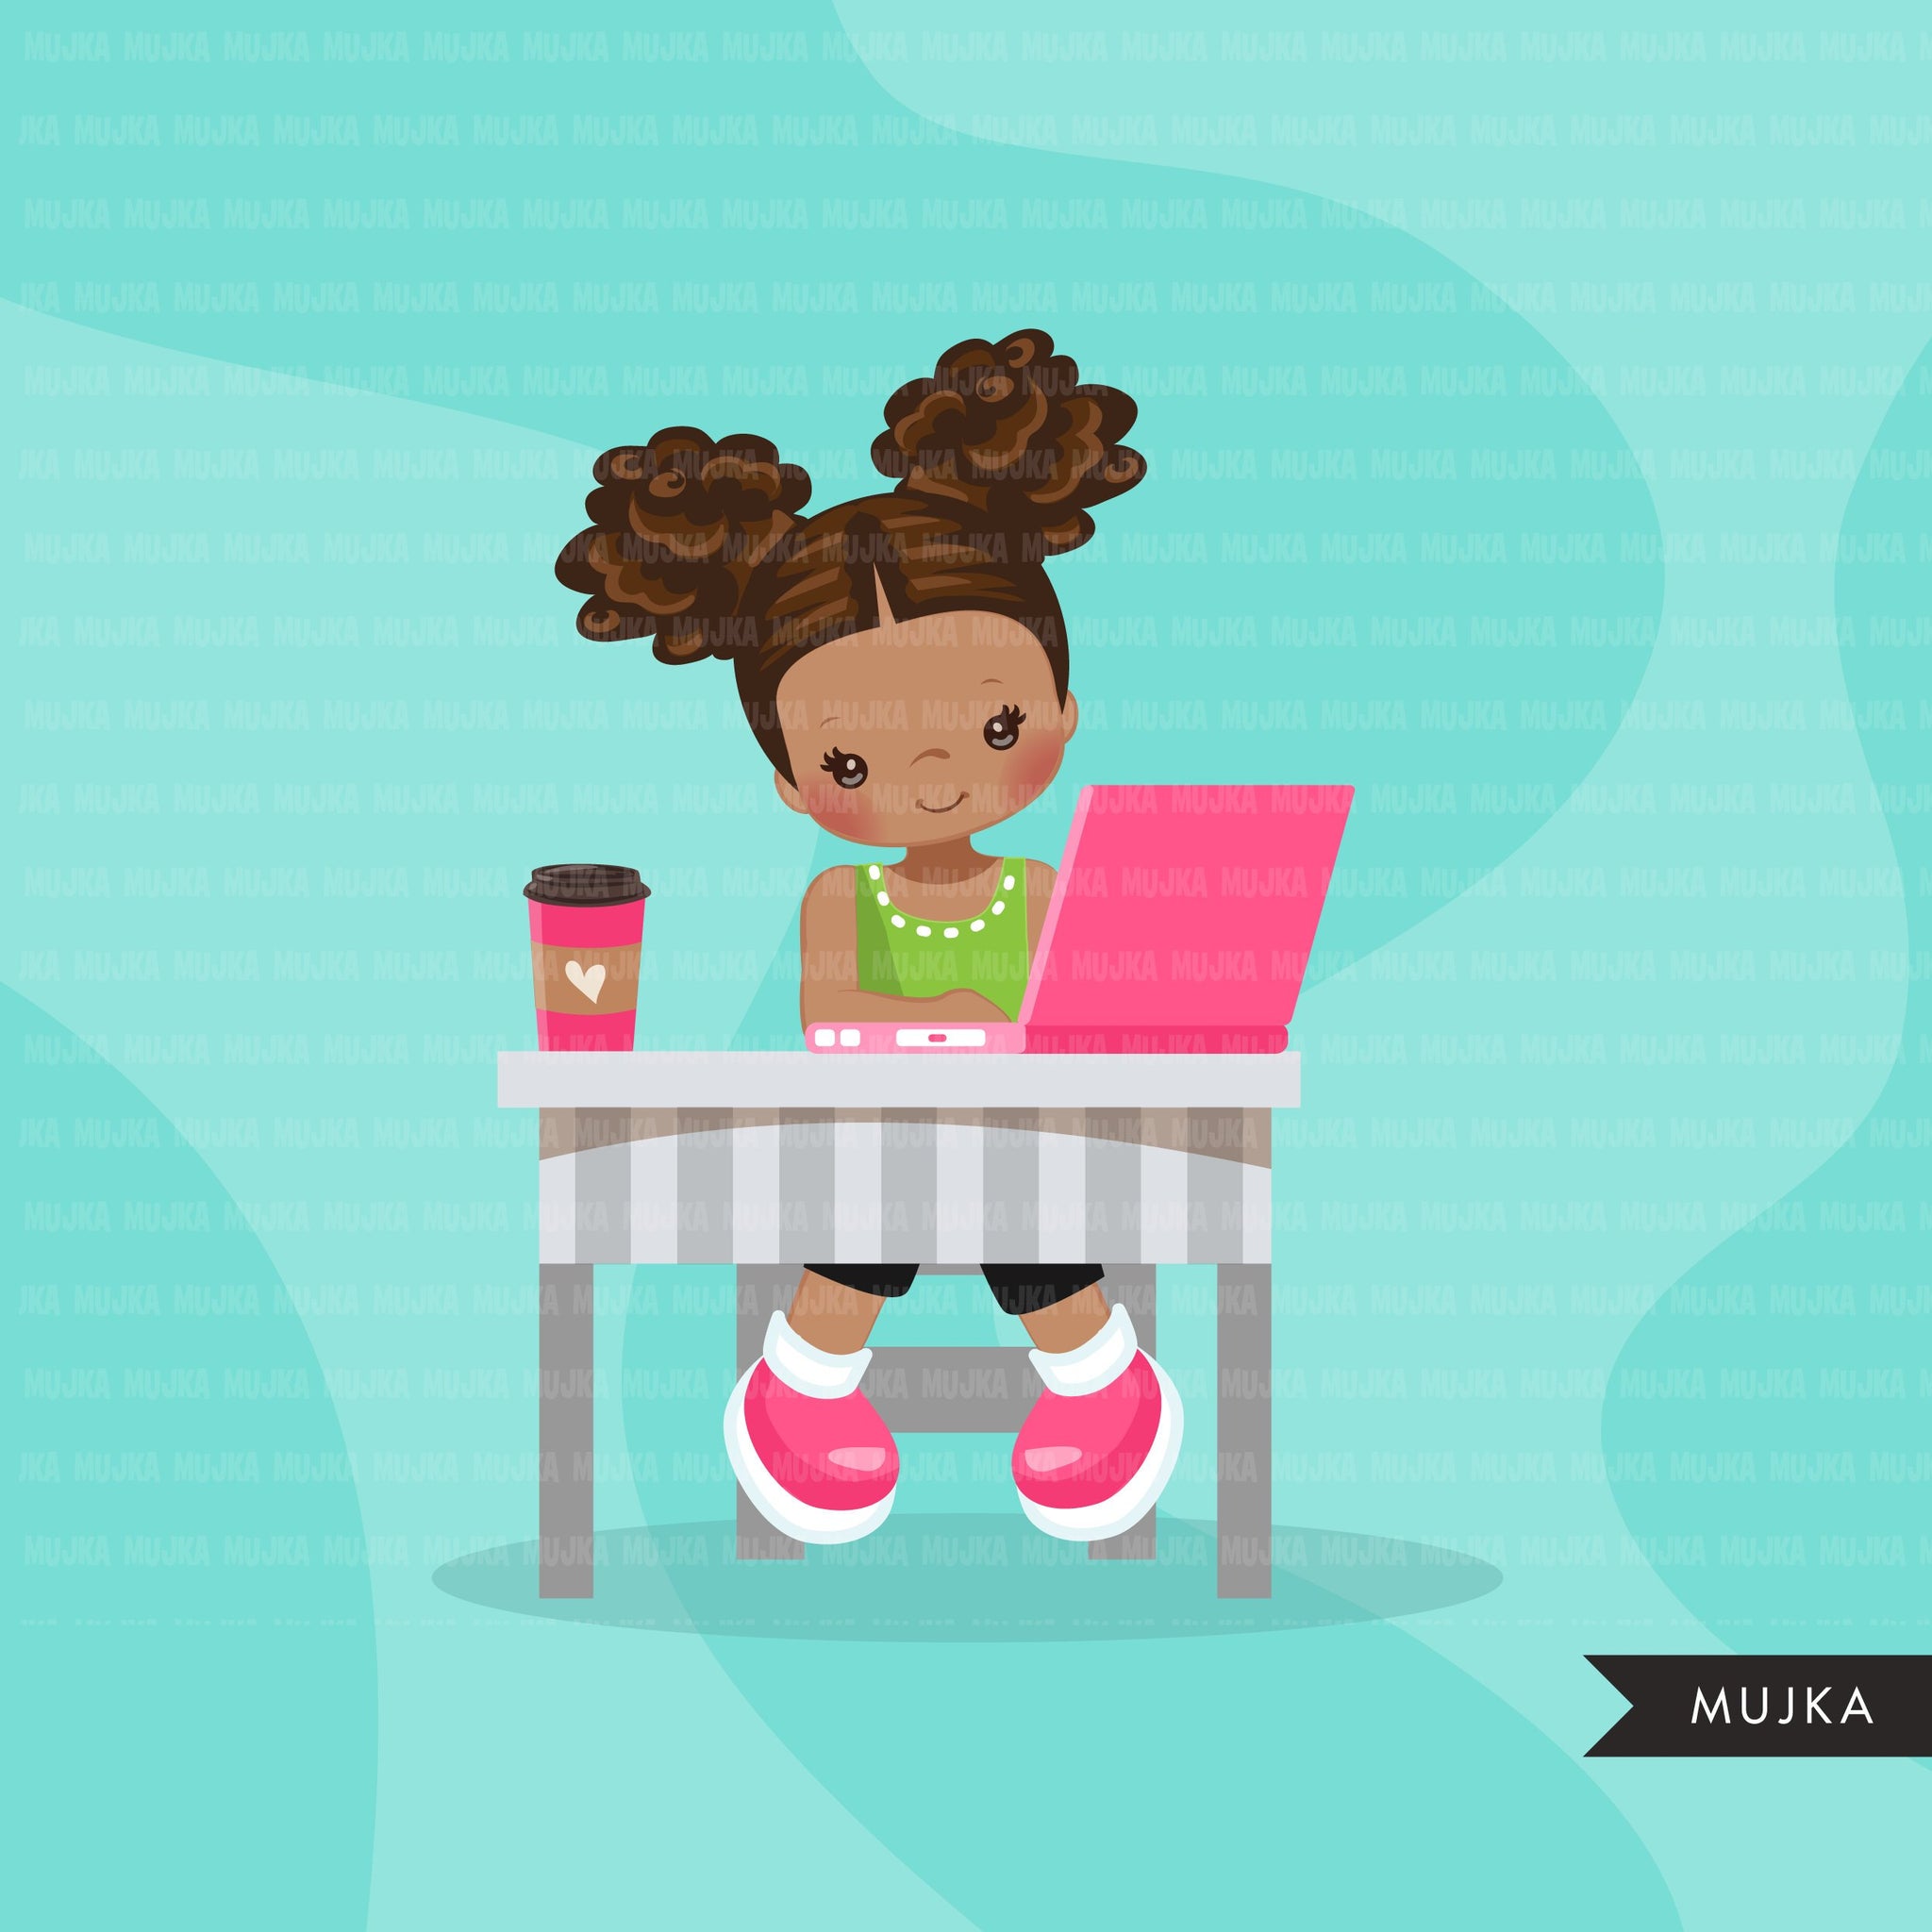 Distant Learning Clipart, Black Girls with pink laptop, homeschooling, student homework, shop logo graphics, Png clip art